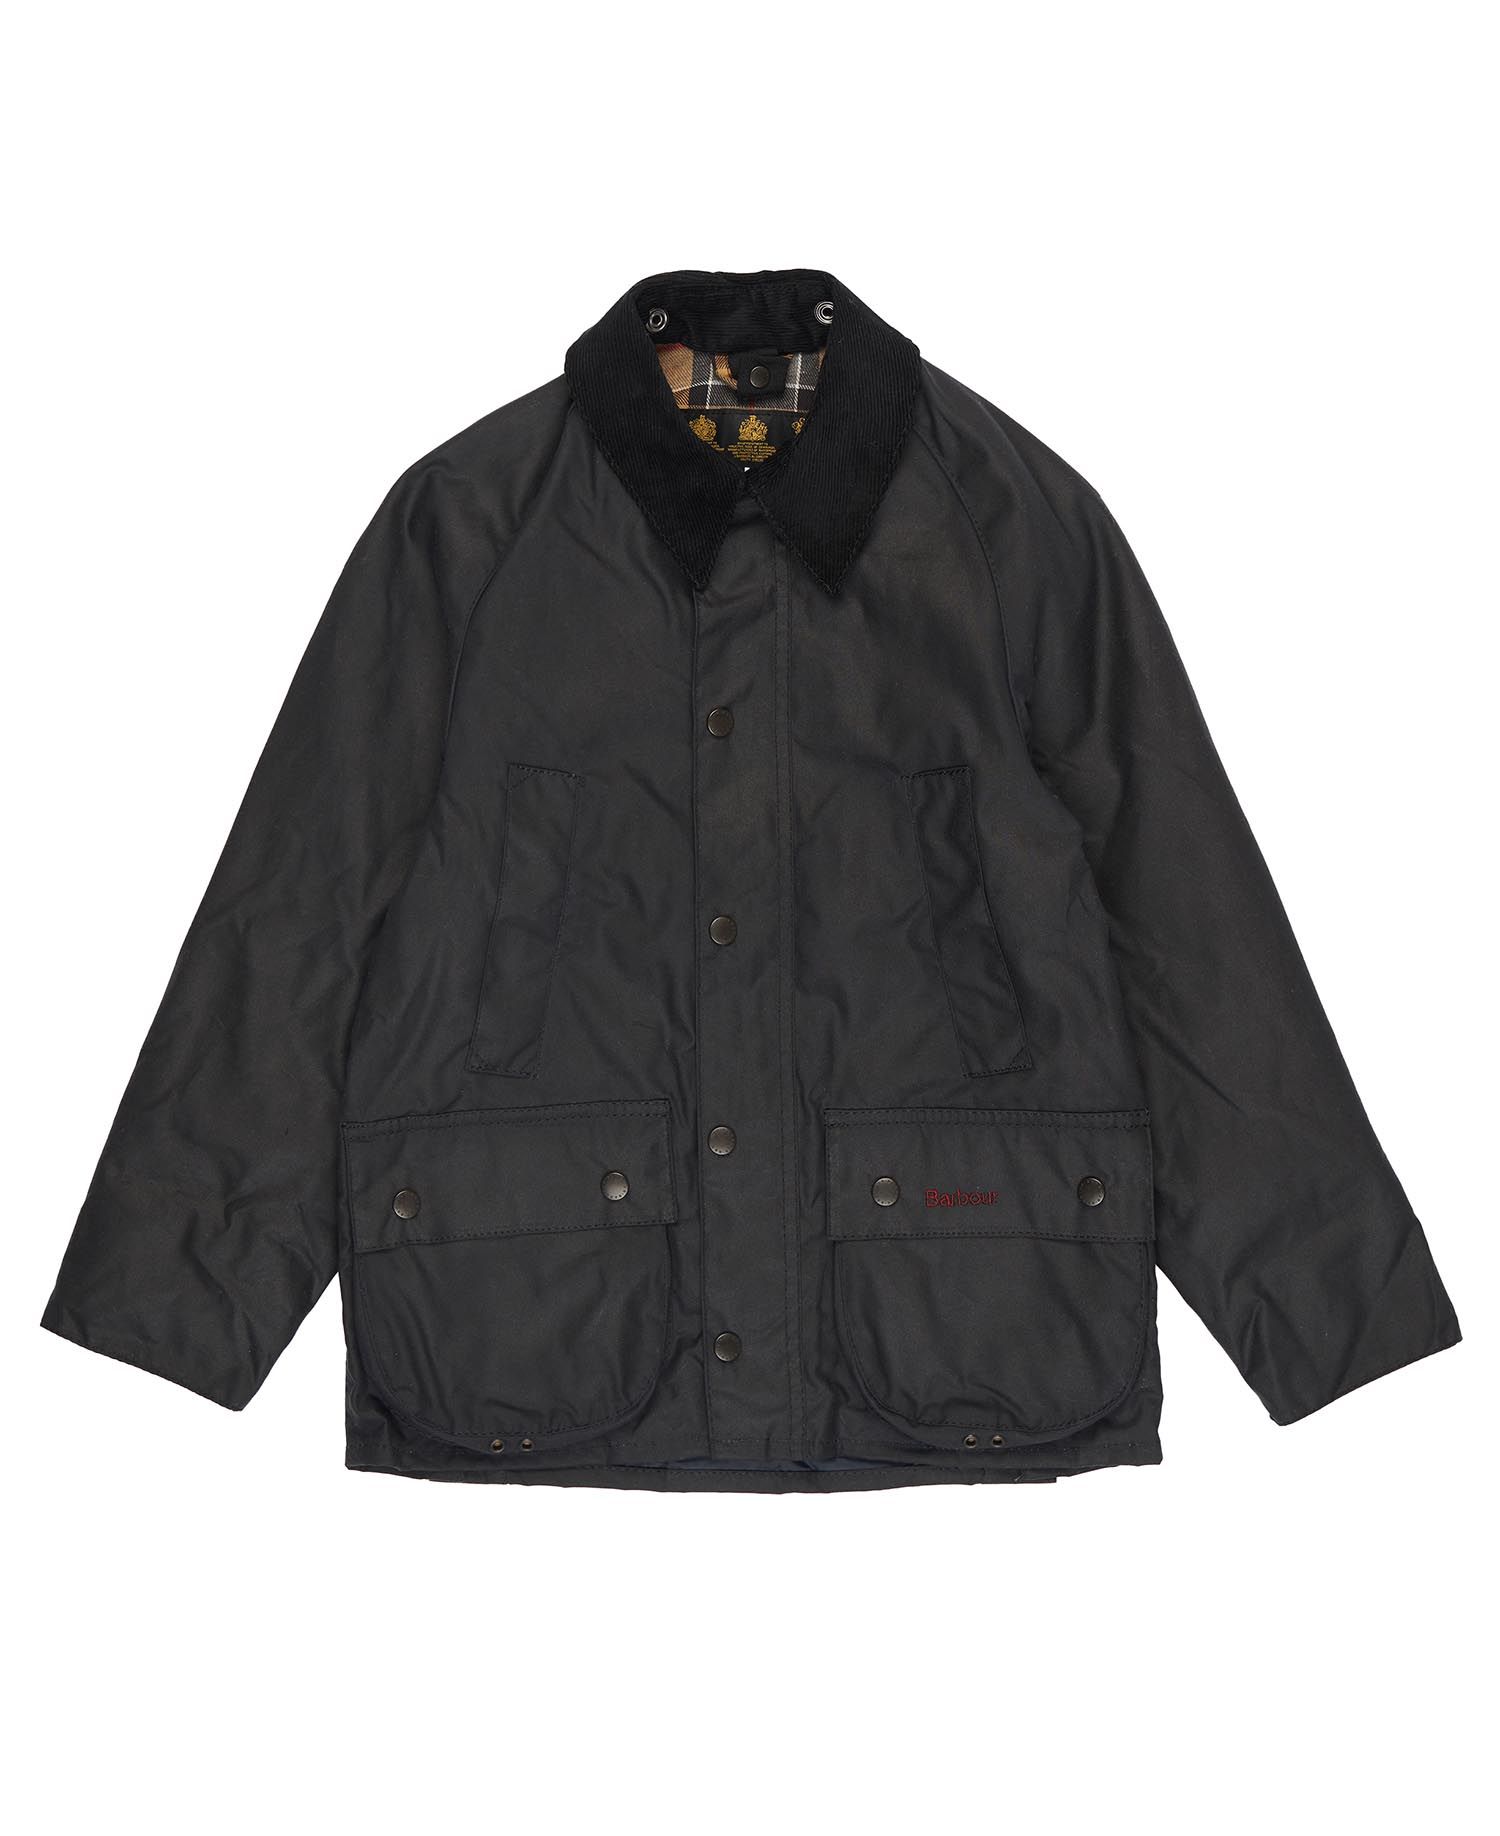 Barbour Boys Bedale Waxed Jacket in Navy | Barbour